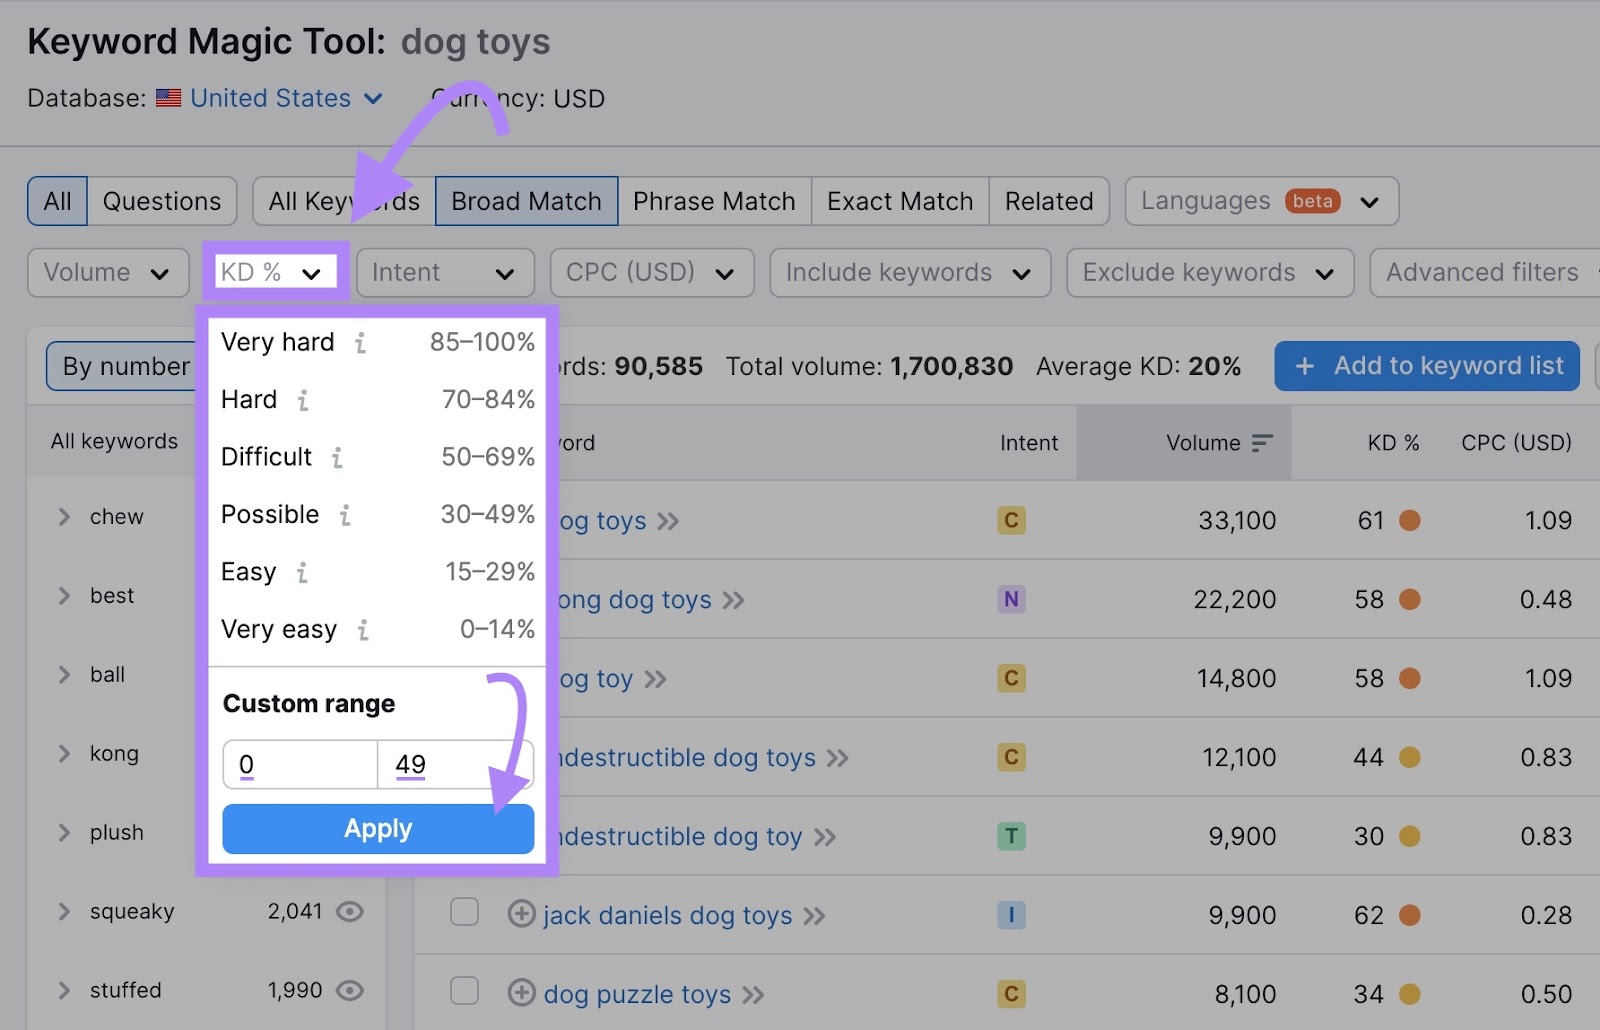 Keyword Magic Tool results for “ toys” showing a custom range of 0-49 entered in the keyword difficulty filter box.